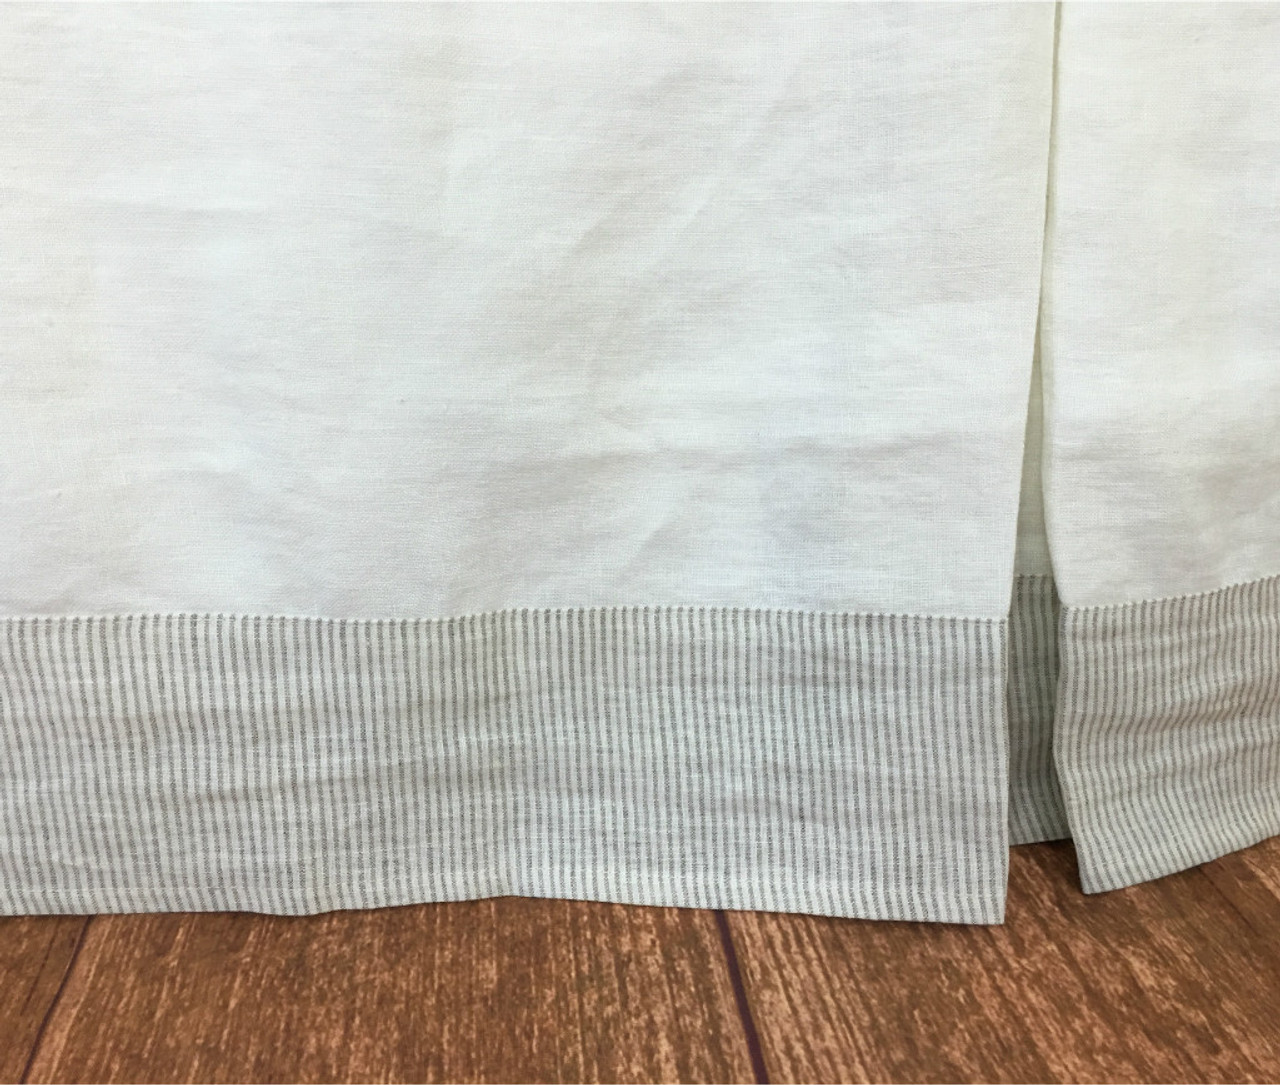 Tailored Bed Skirt in Soft White with Linen Ticking Striped Border ...